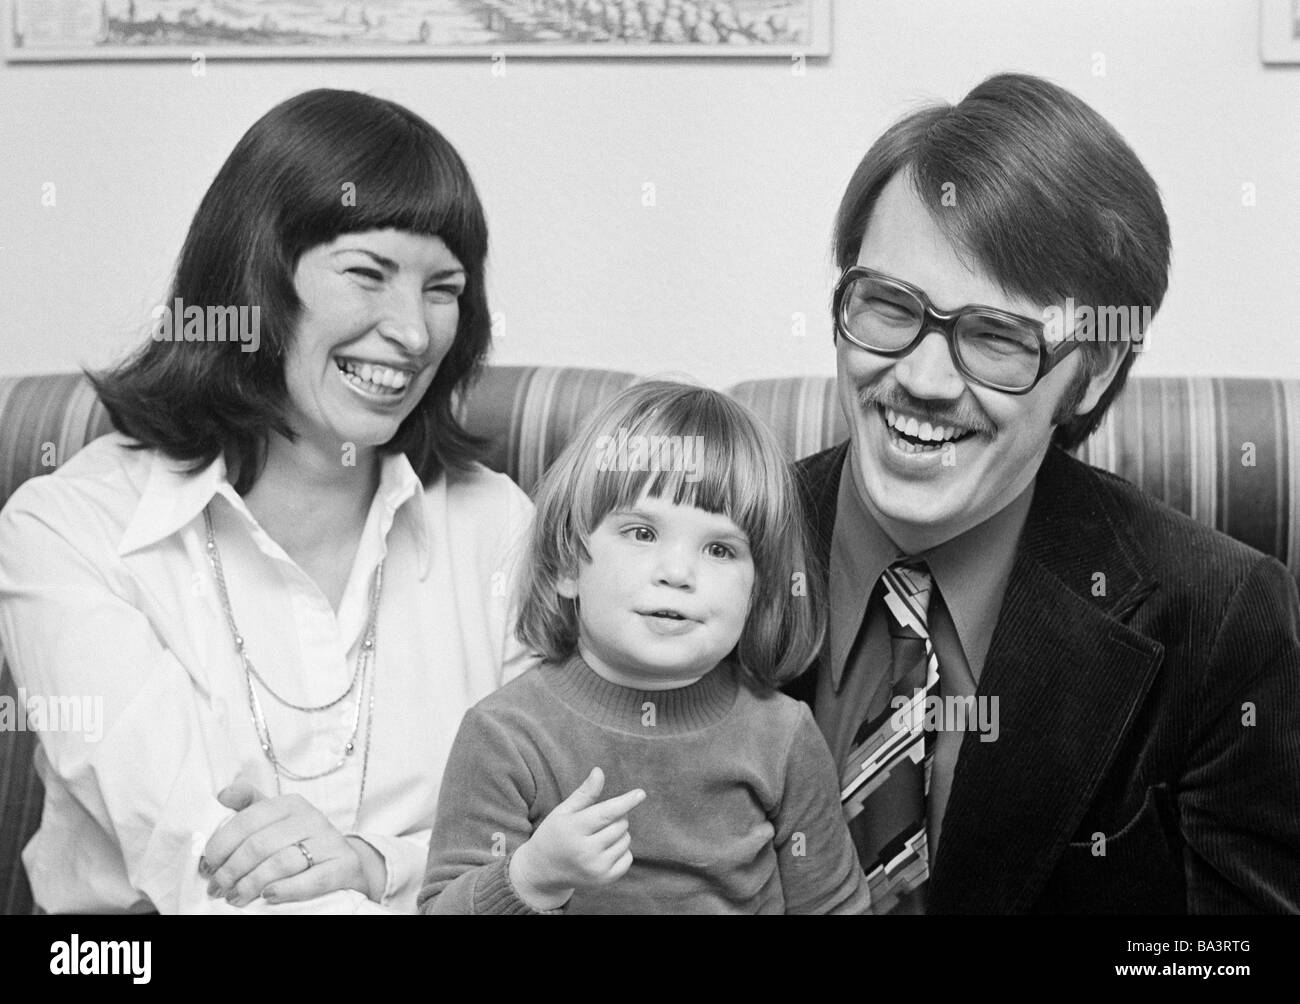 Seventies, black and white photo, people, young family, one child, woman, aged 30 to 35 years, girl, aged 3 to 4 years, man, aged 30 to 40 years, Ria, Kathrin, Wolfgang Stock Photo